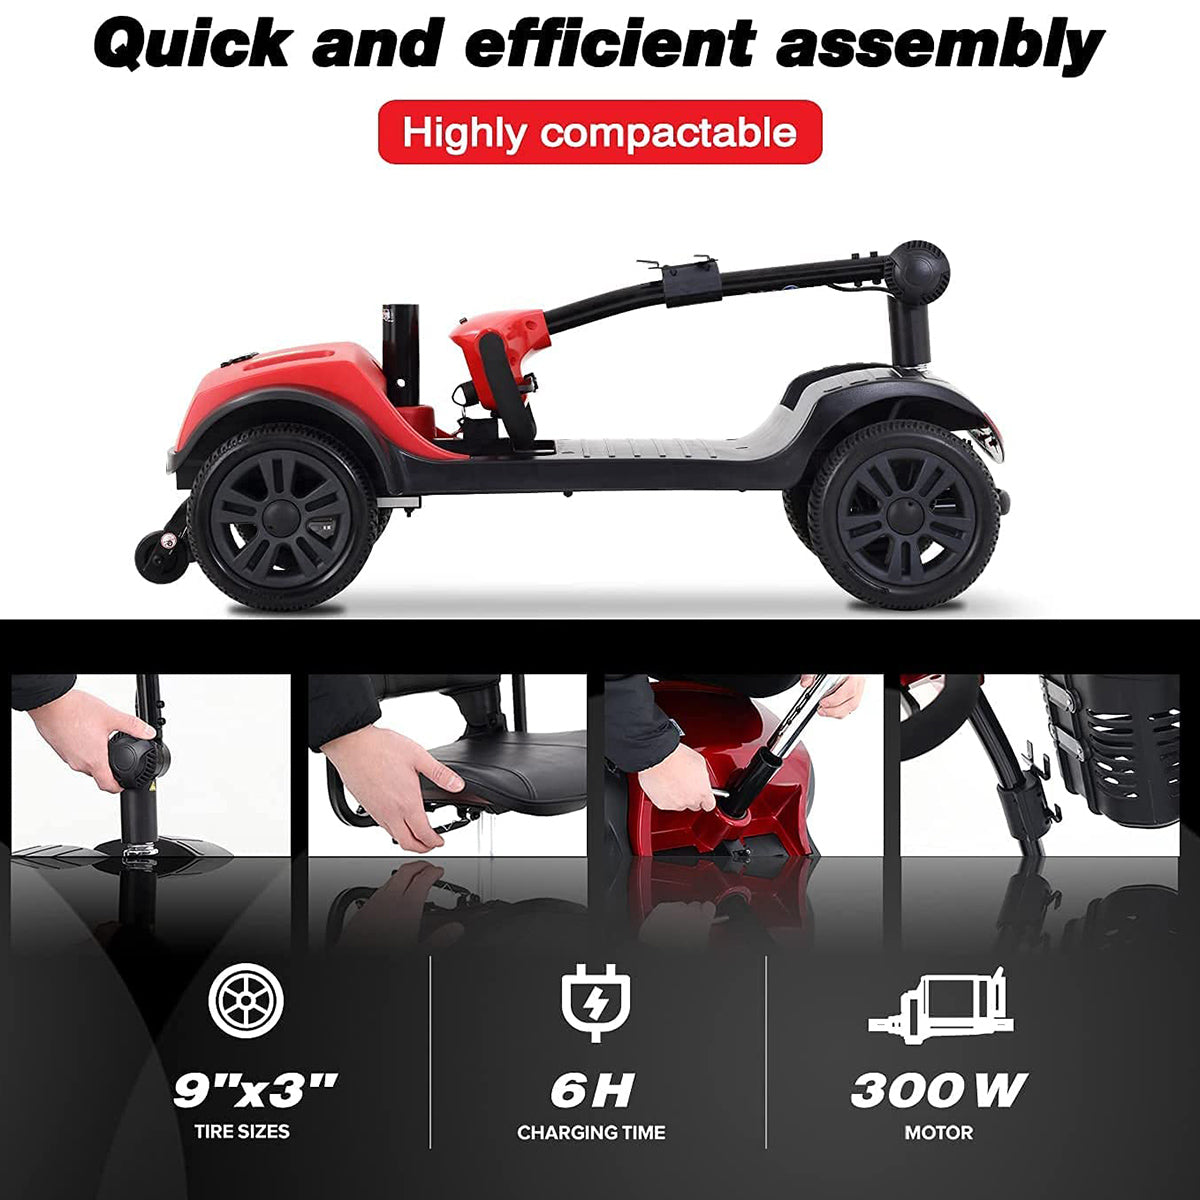 HDJ 10 Miles Folding Electric Scooter Powered Electric Scooter Mobility Scooters for Seniors Adults,4 Wheel Compact Mobile Scooter with Charger and Basket,330 lbs Max Weight